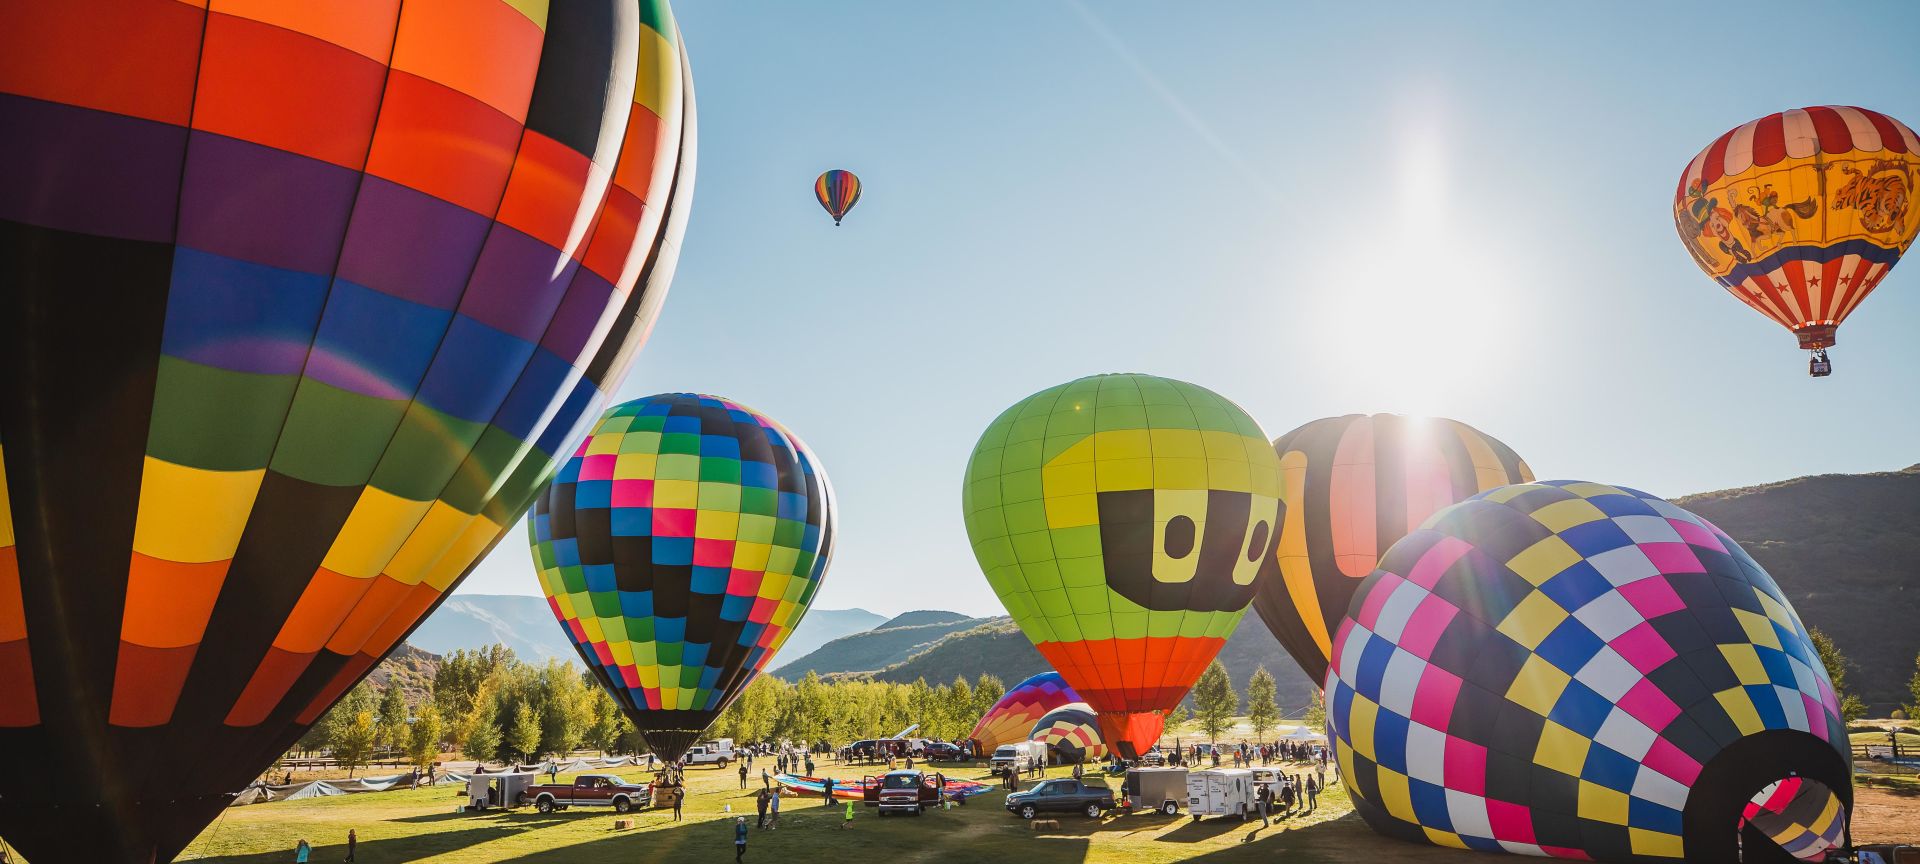 A Group Of Colorful Hot Air Balloon In The Sky